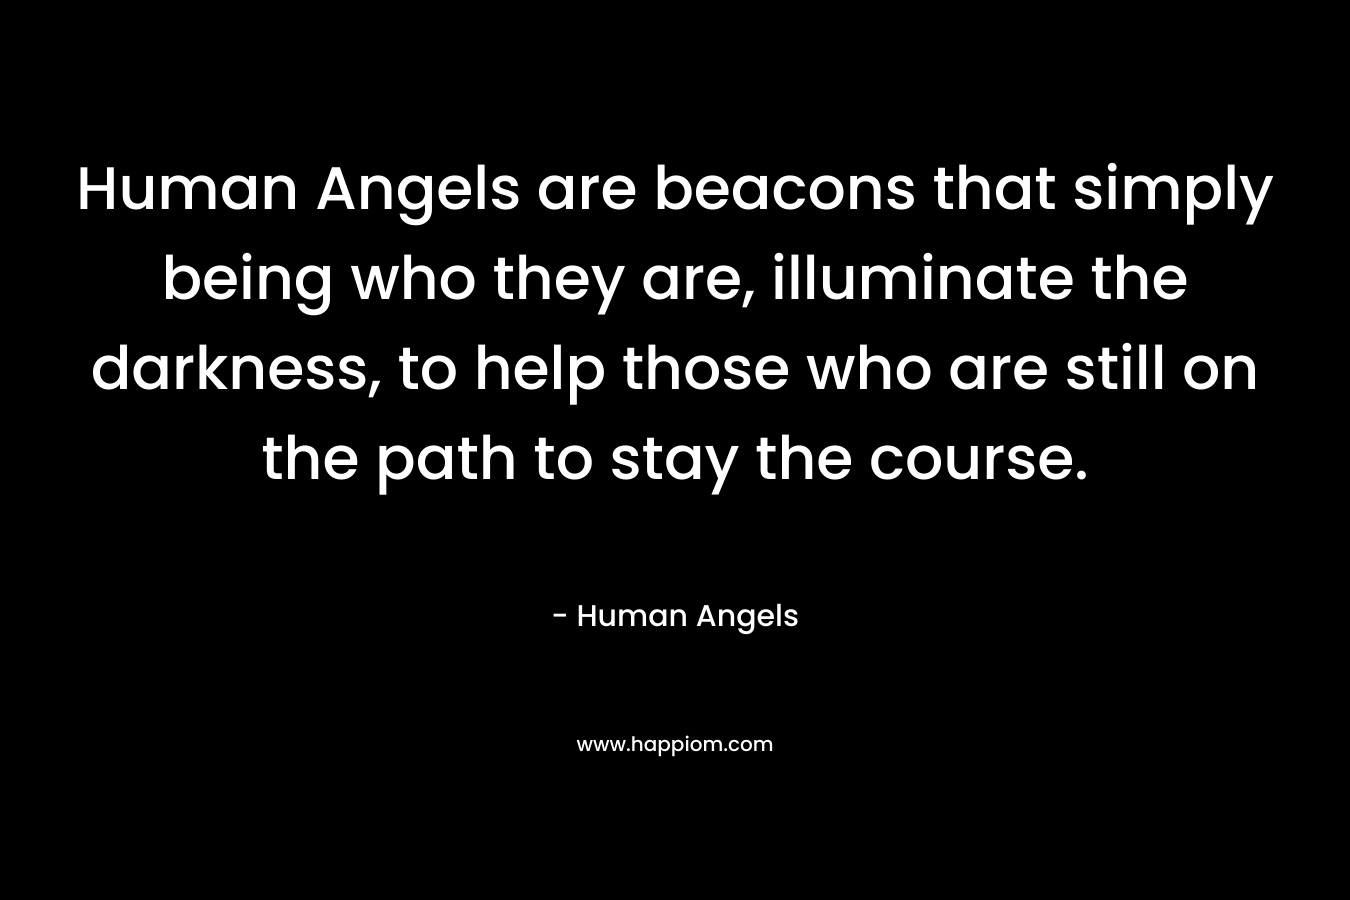 Human Angels are beacons that simply being who they are, illuminate the darkness, to help those who are still on the path to stay the course. – Human Angels